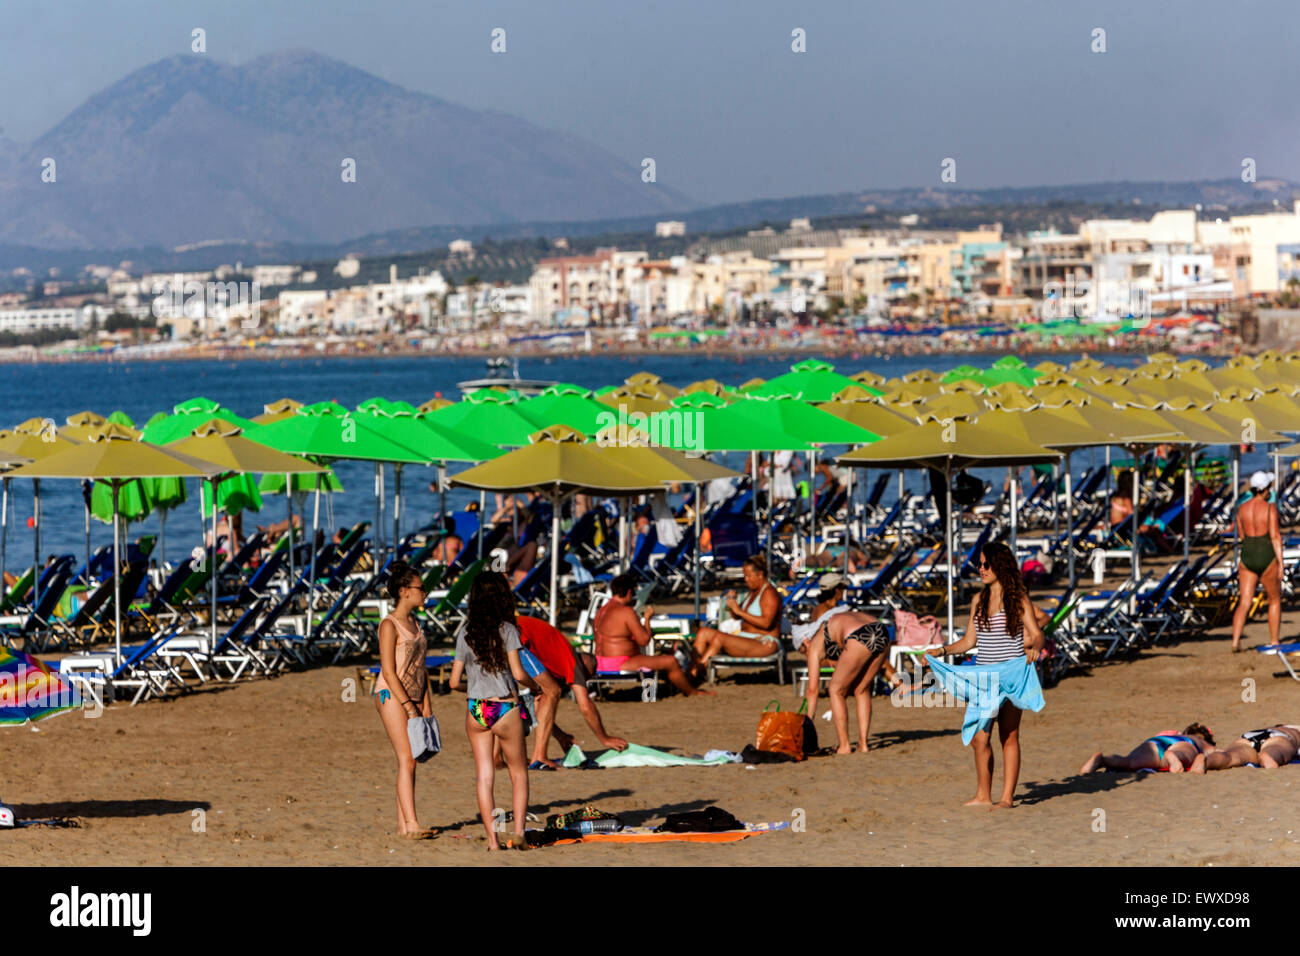 A crowd of people, Tourists relaxing on the sandy beach Rethymno Crete beach Greece beach sunbathers, holidaymakers Stock Photo